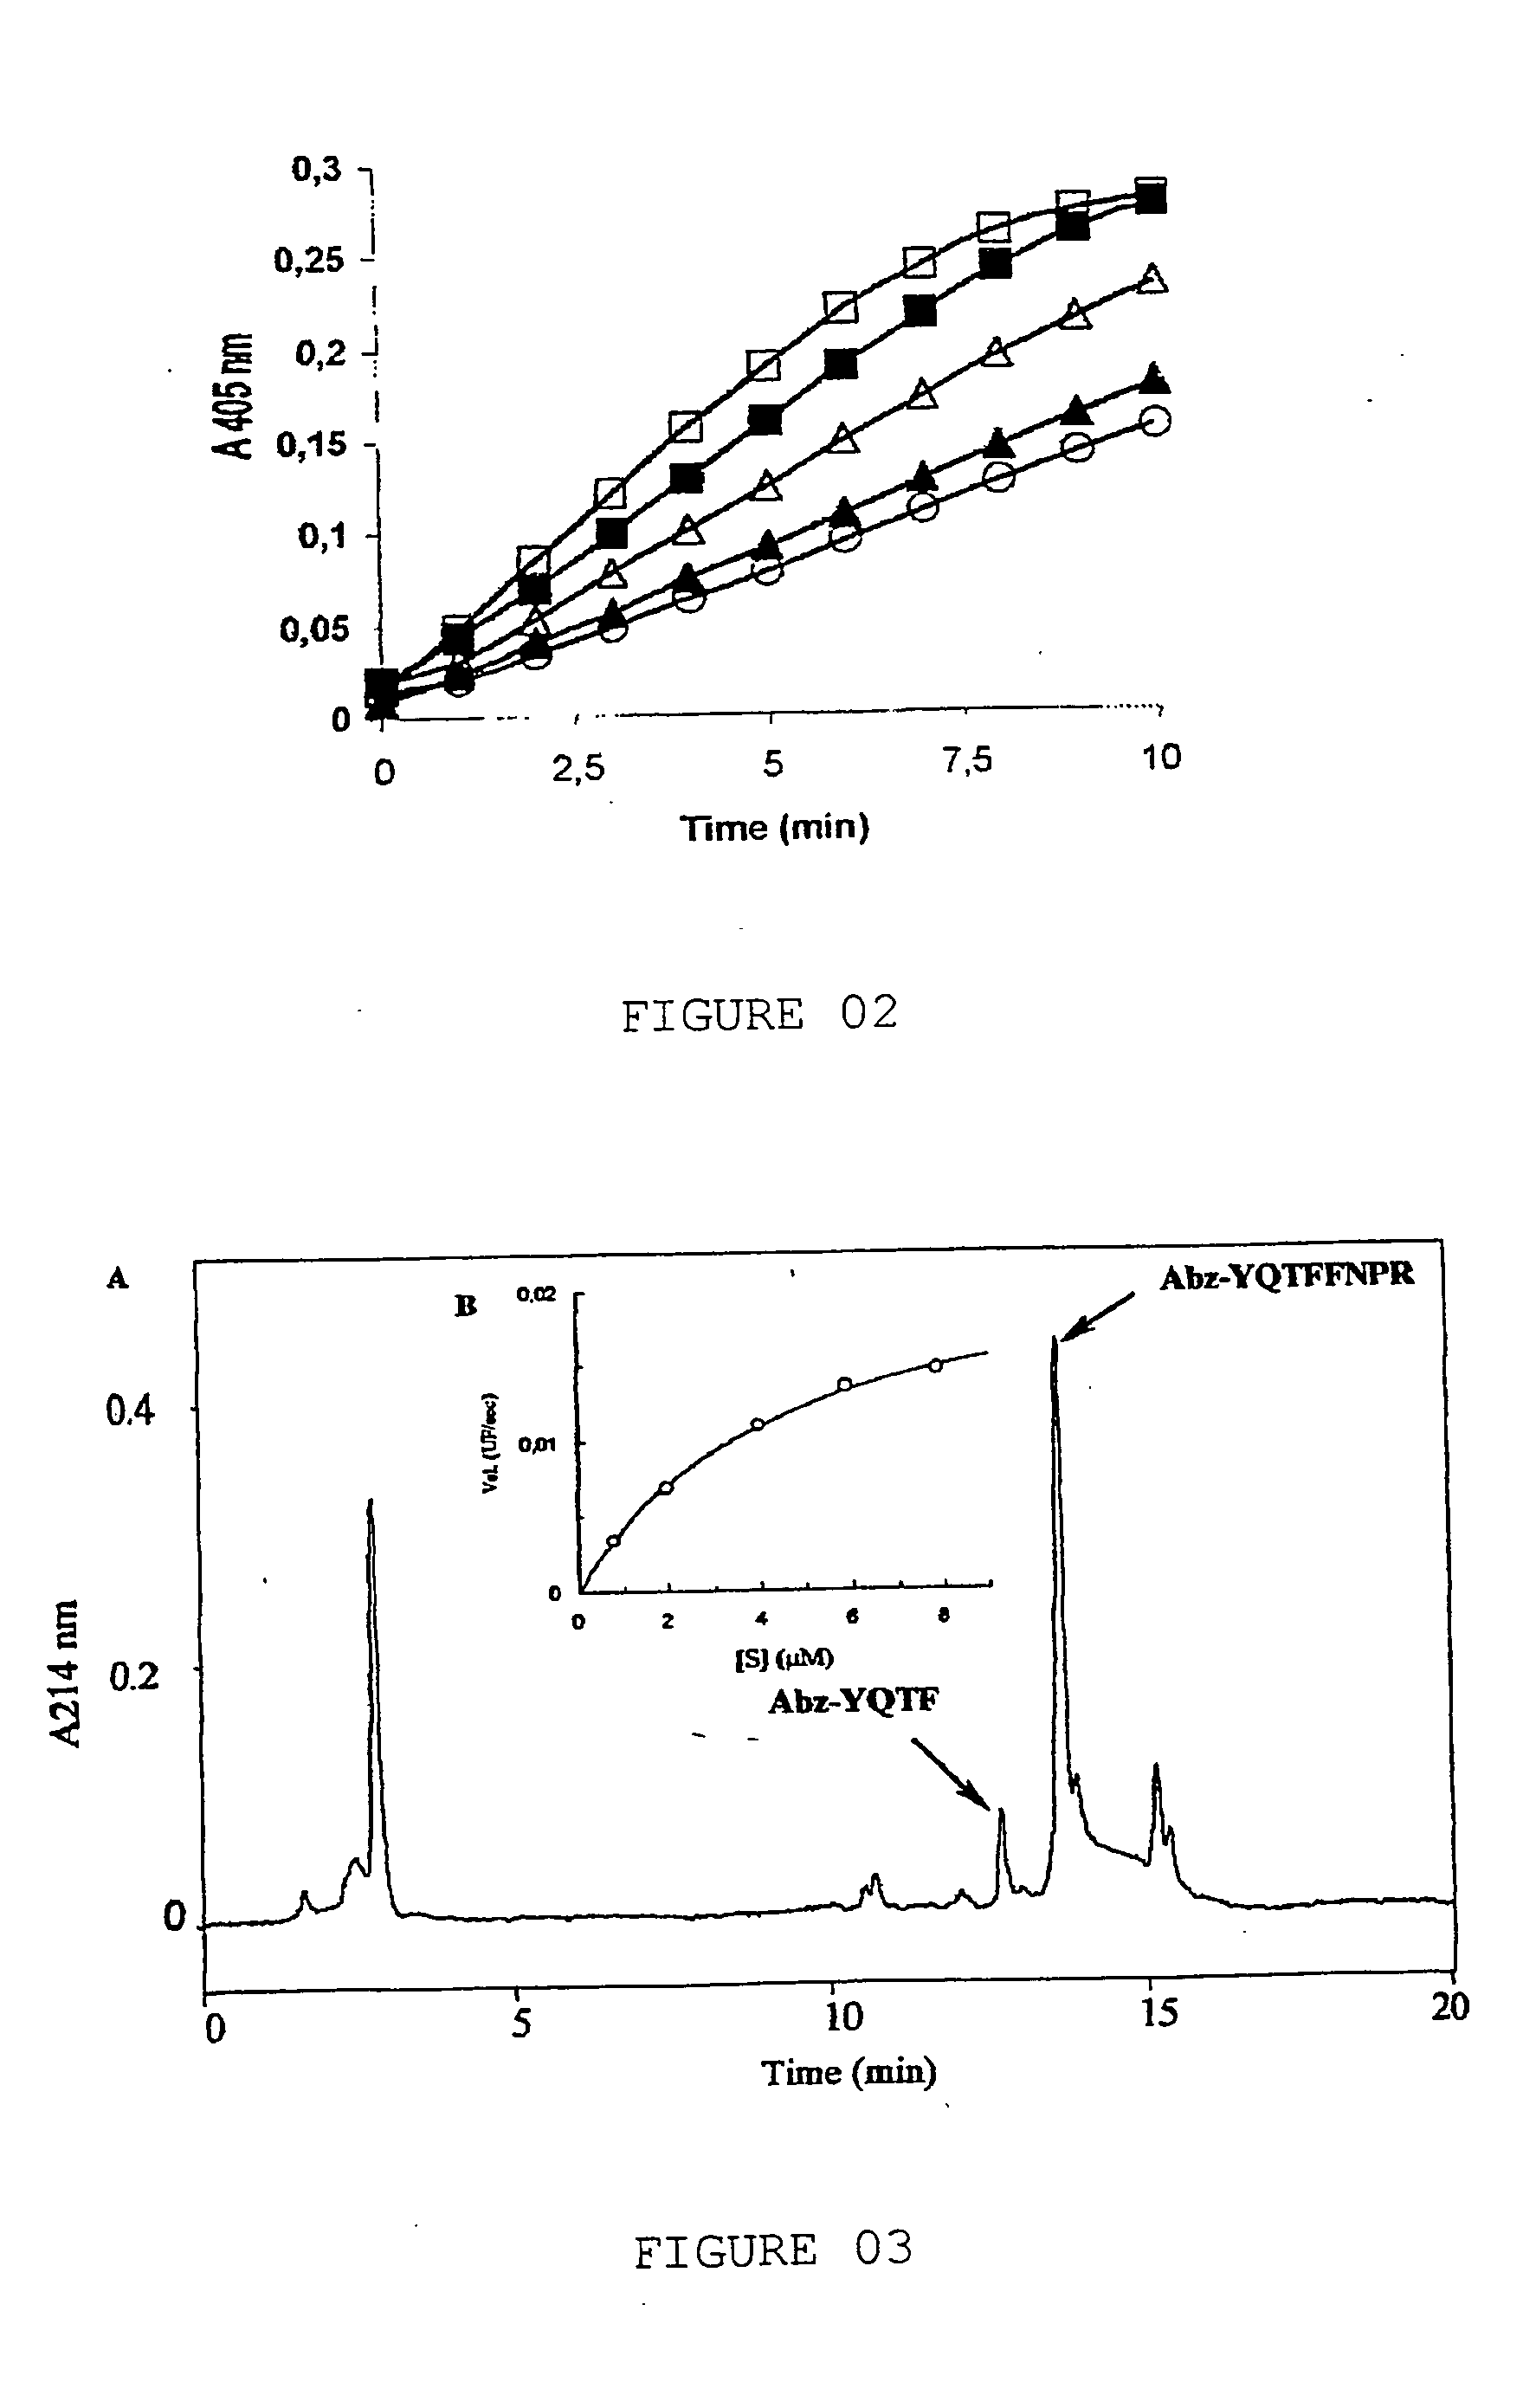 Purifying process of soluble proteins of the l.obliqua bristles through prothrombin activation: process for a partial determination of the amino acids sequence of the prothrombin activator; process for determining the prothrombin activation of fraction II, n-terminal and internal fragments sequences